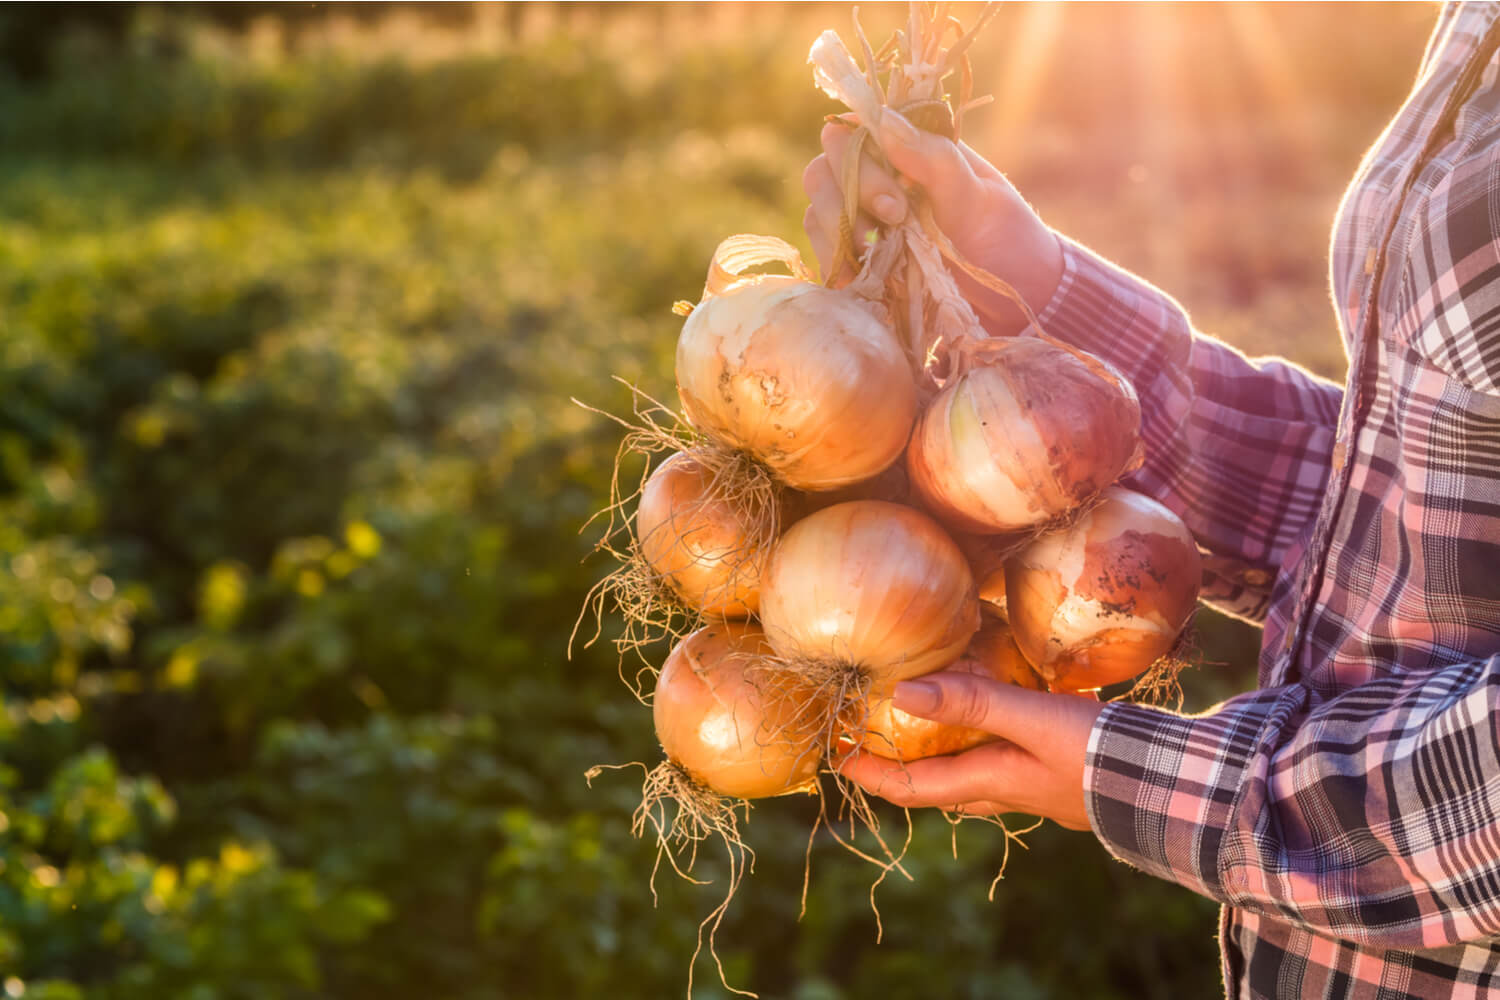 woman holding bunch of onions